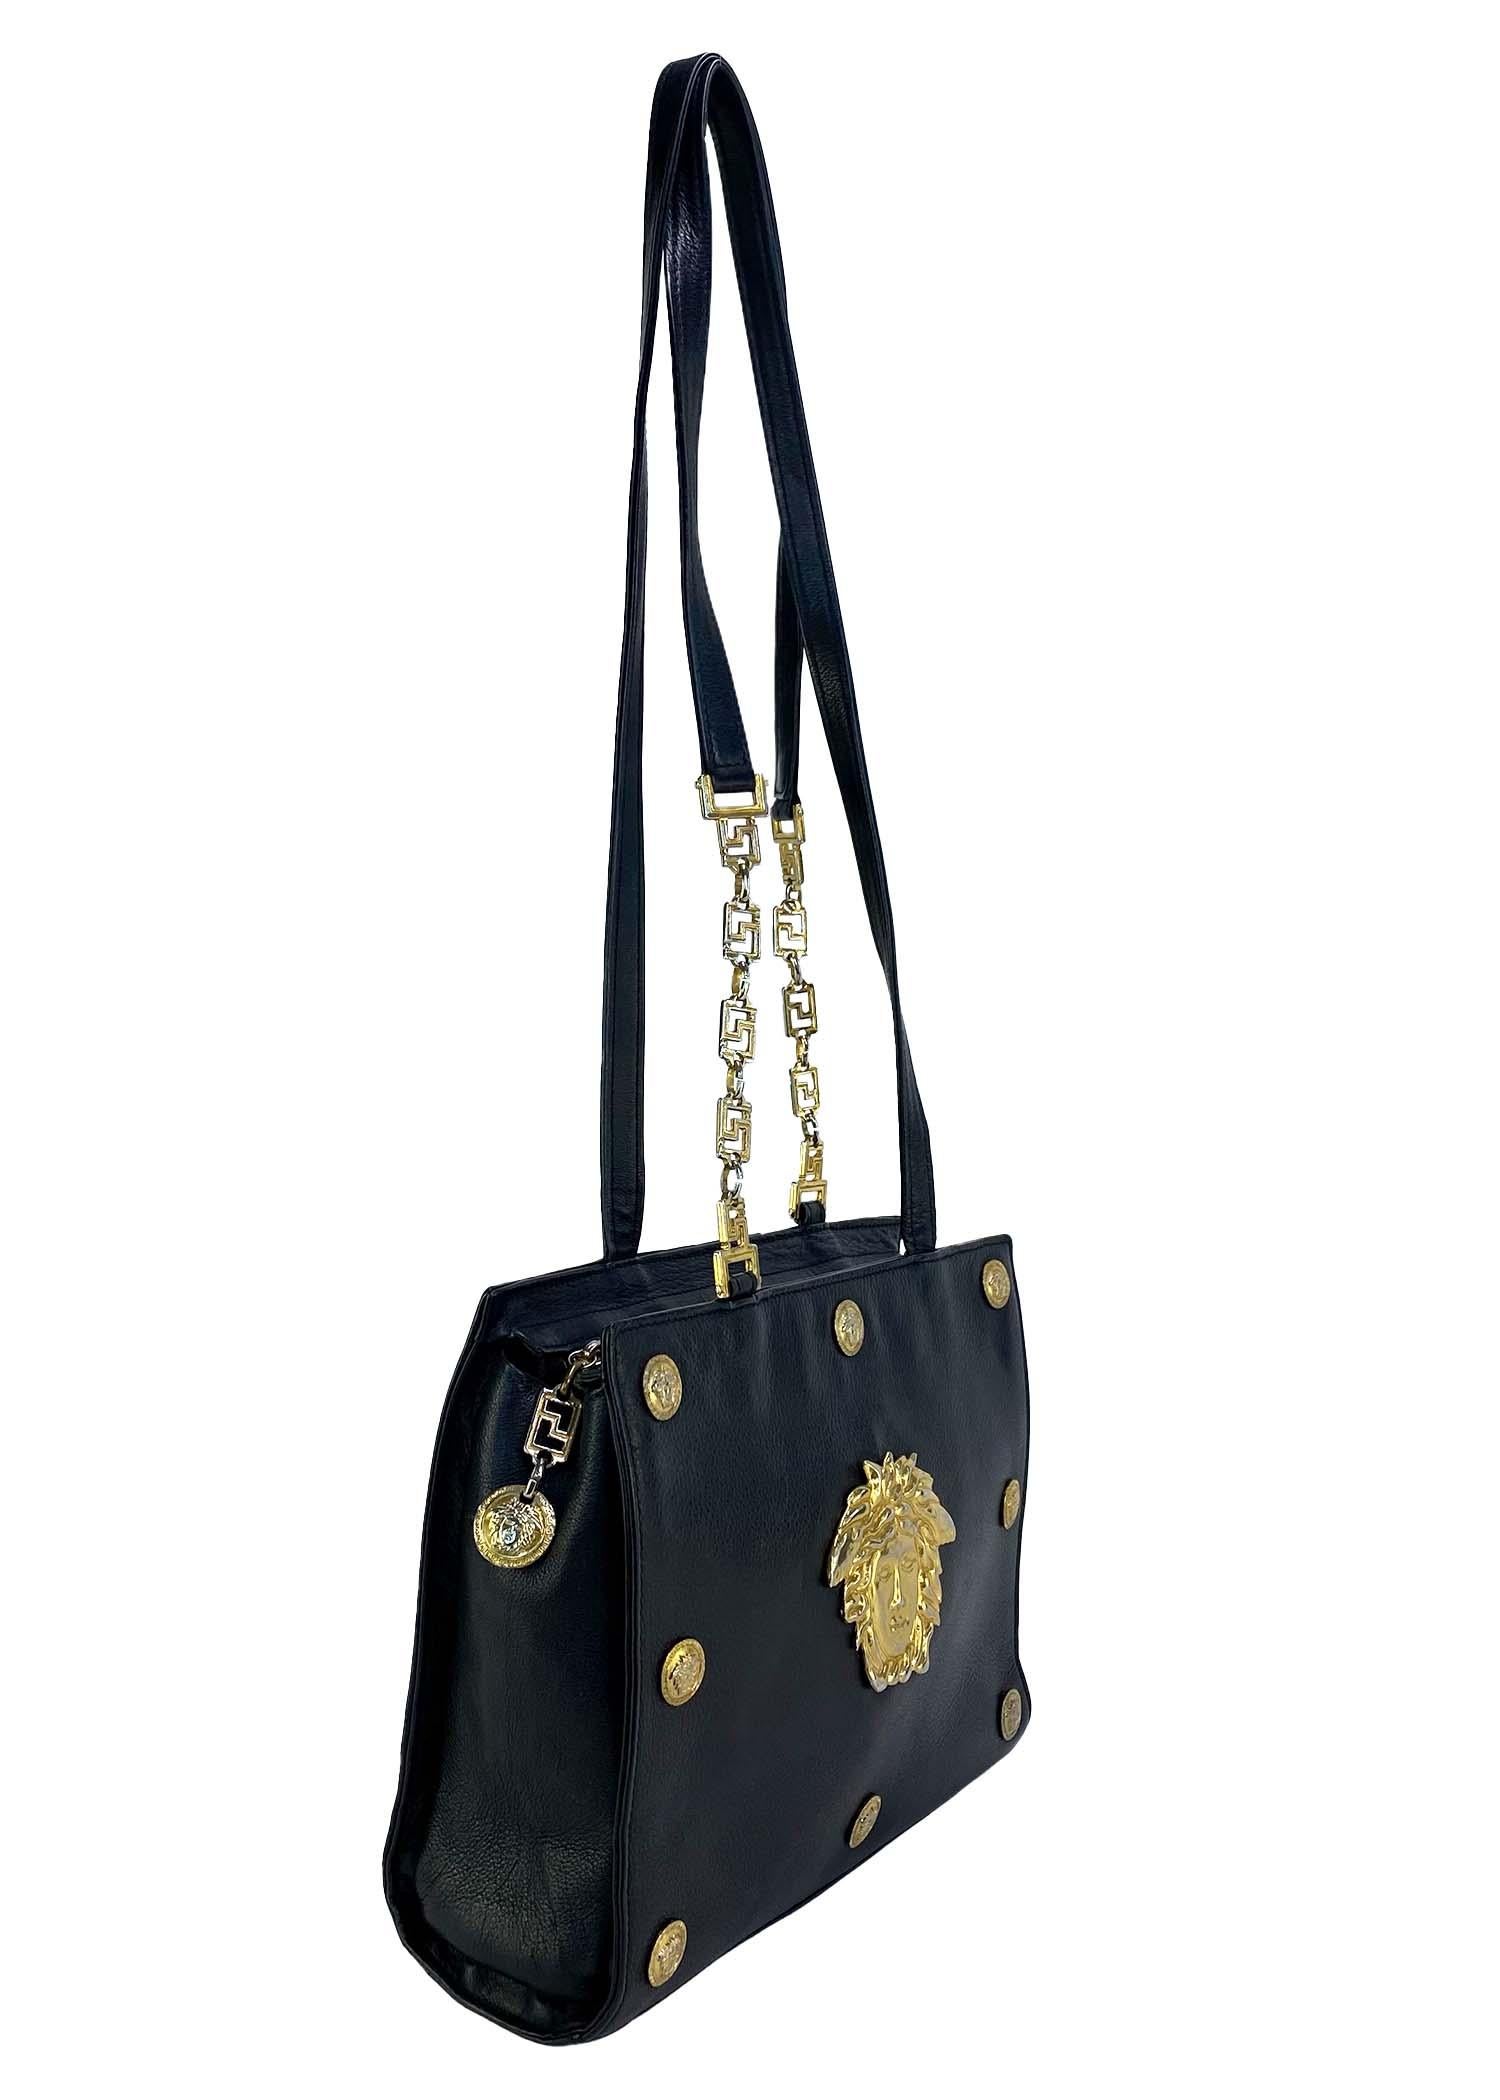 Presenting a classically Gianni Versace Couture purse, designed by Gianni Versace. Created in the early/mid 1990s, this bag constructed entirely of black leather and features a border of small Medusa logo medallions with a large gold colored Greek